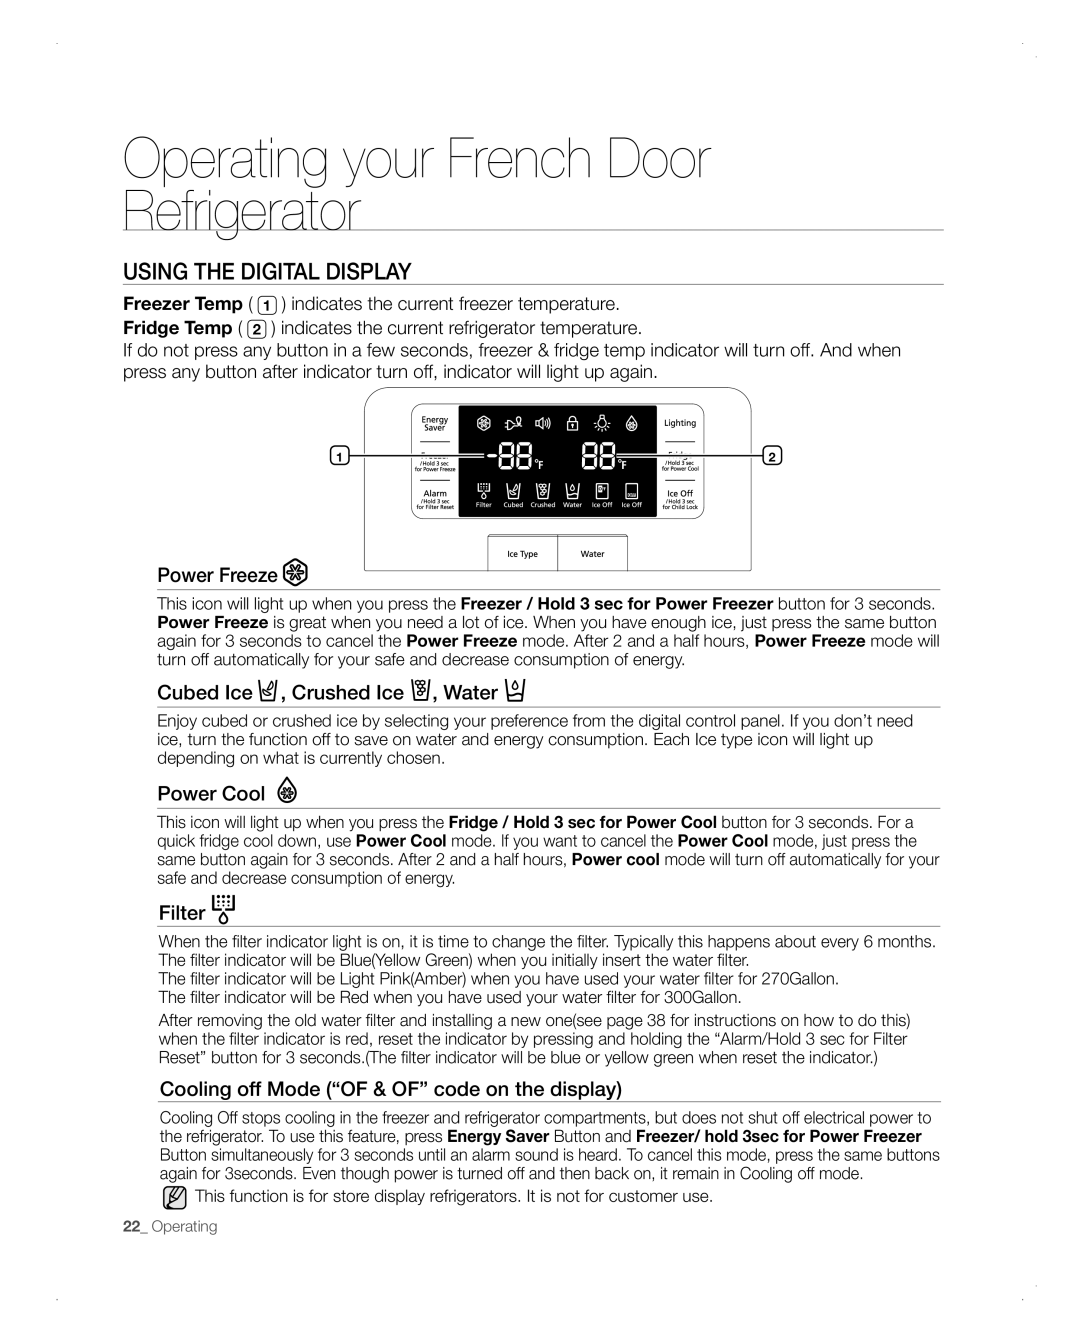 Samsung RFG298AARS Using The Digital Display, Operating your French Door Refrigerator, Power Freeze, Power Cool, Filter 